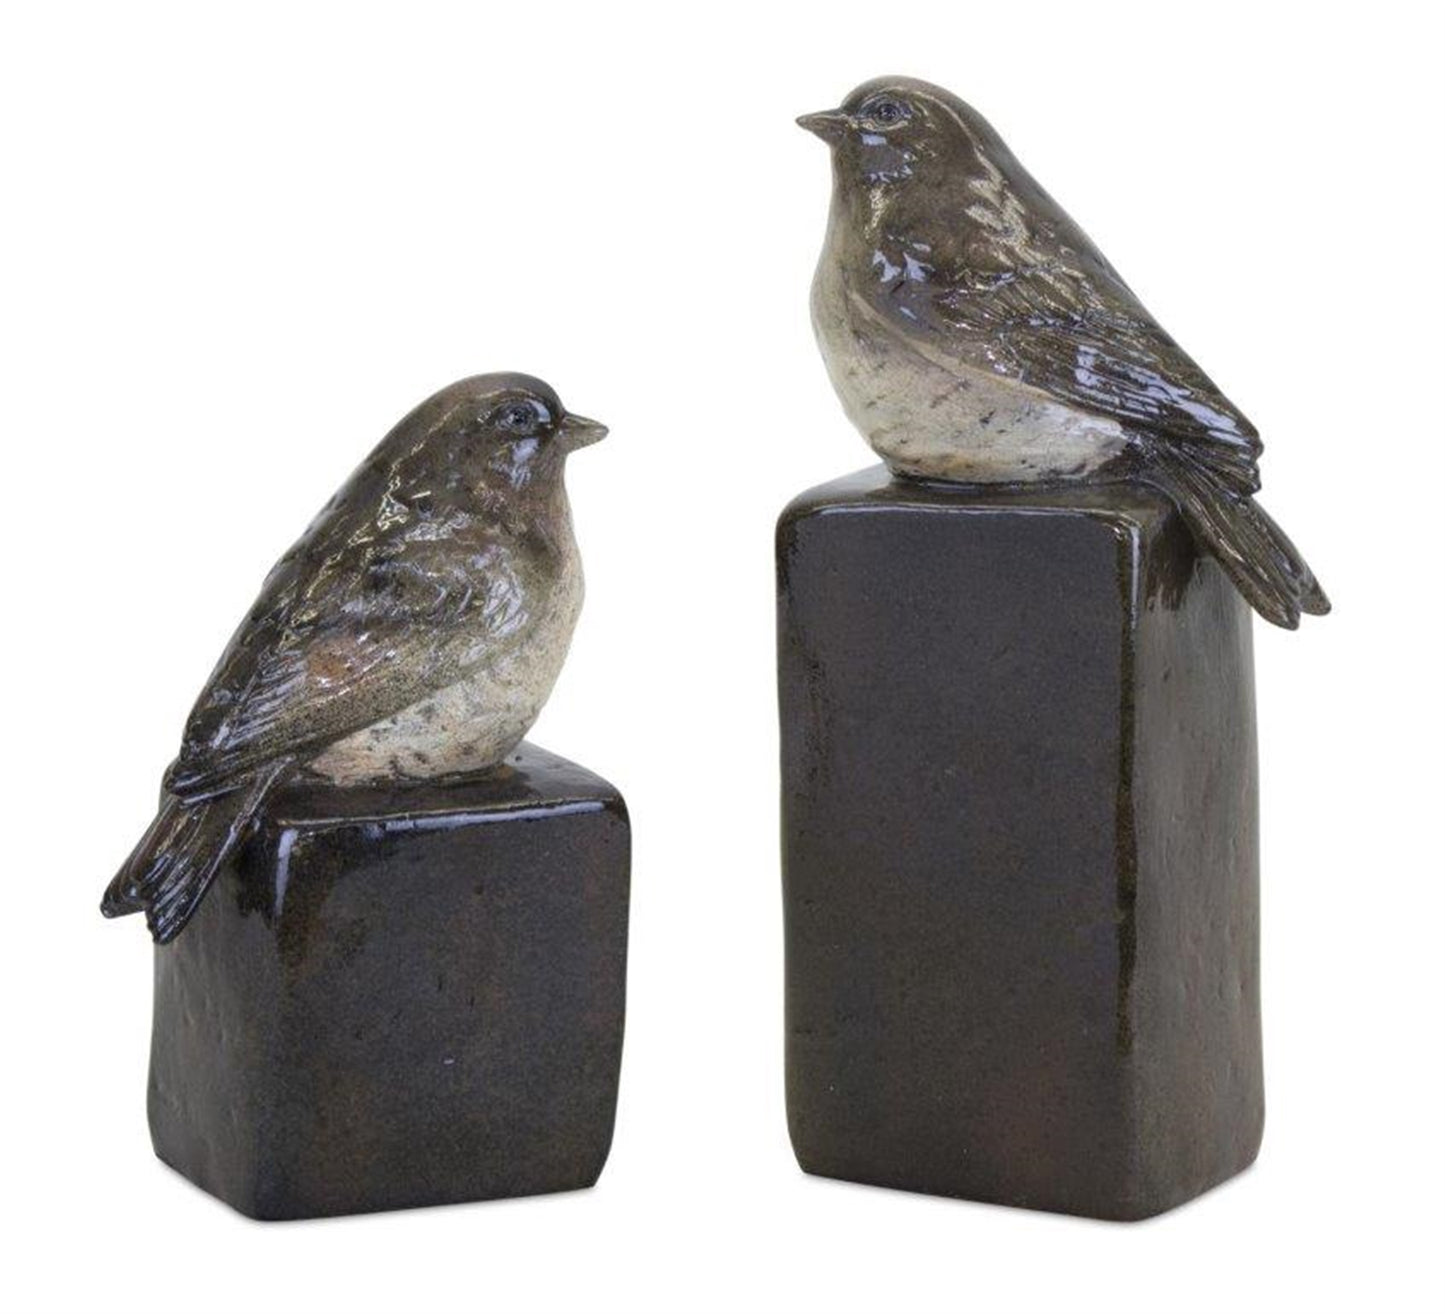 Stone Perched Bird Figurine with Block Weight (Set of 2)